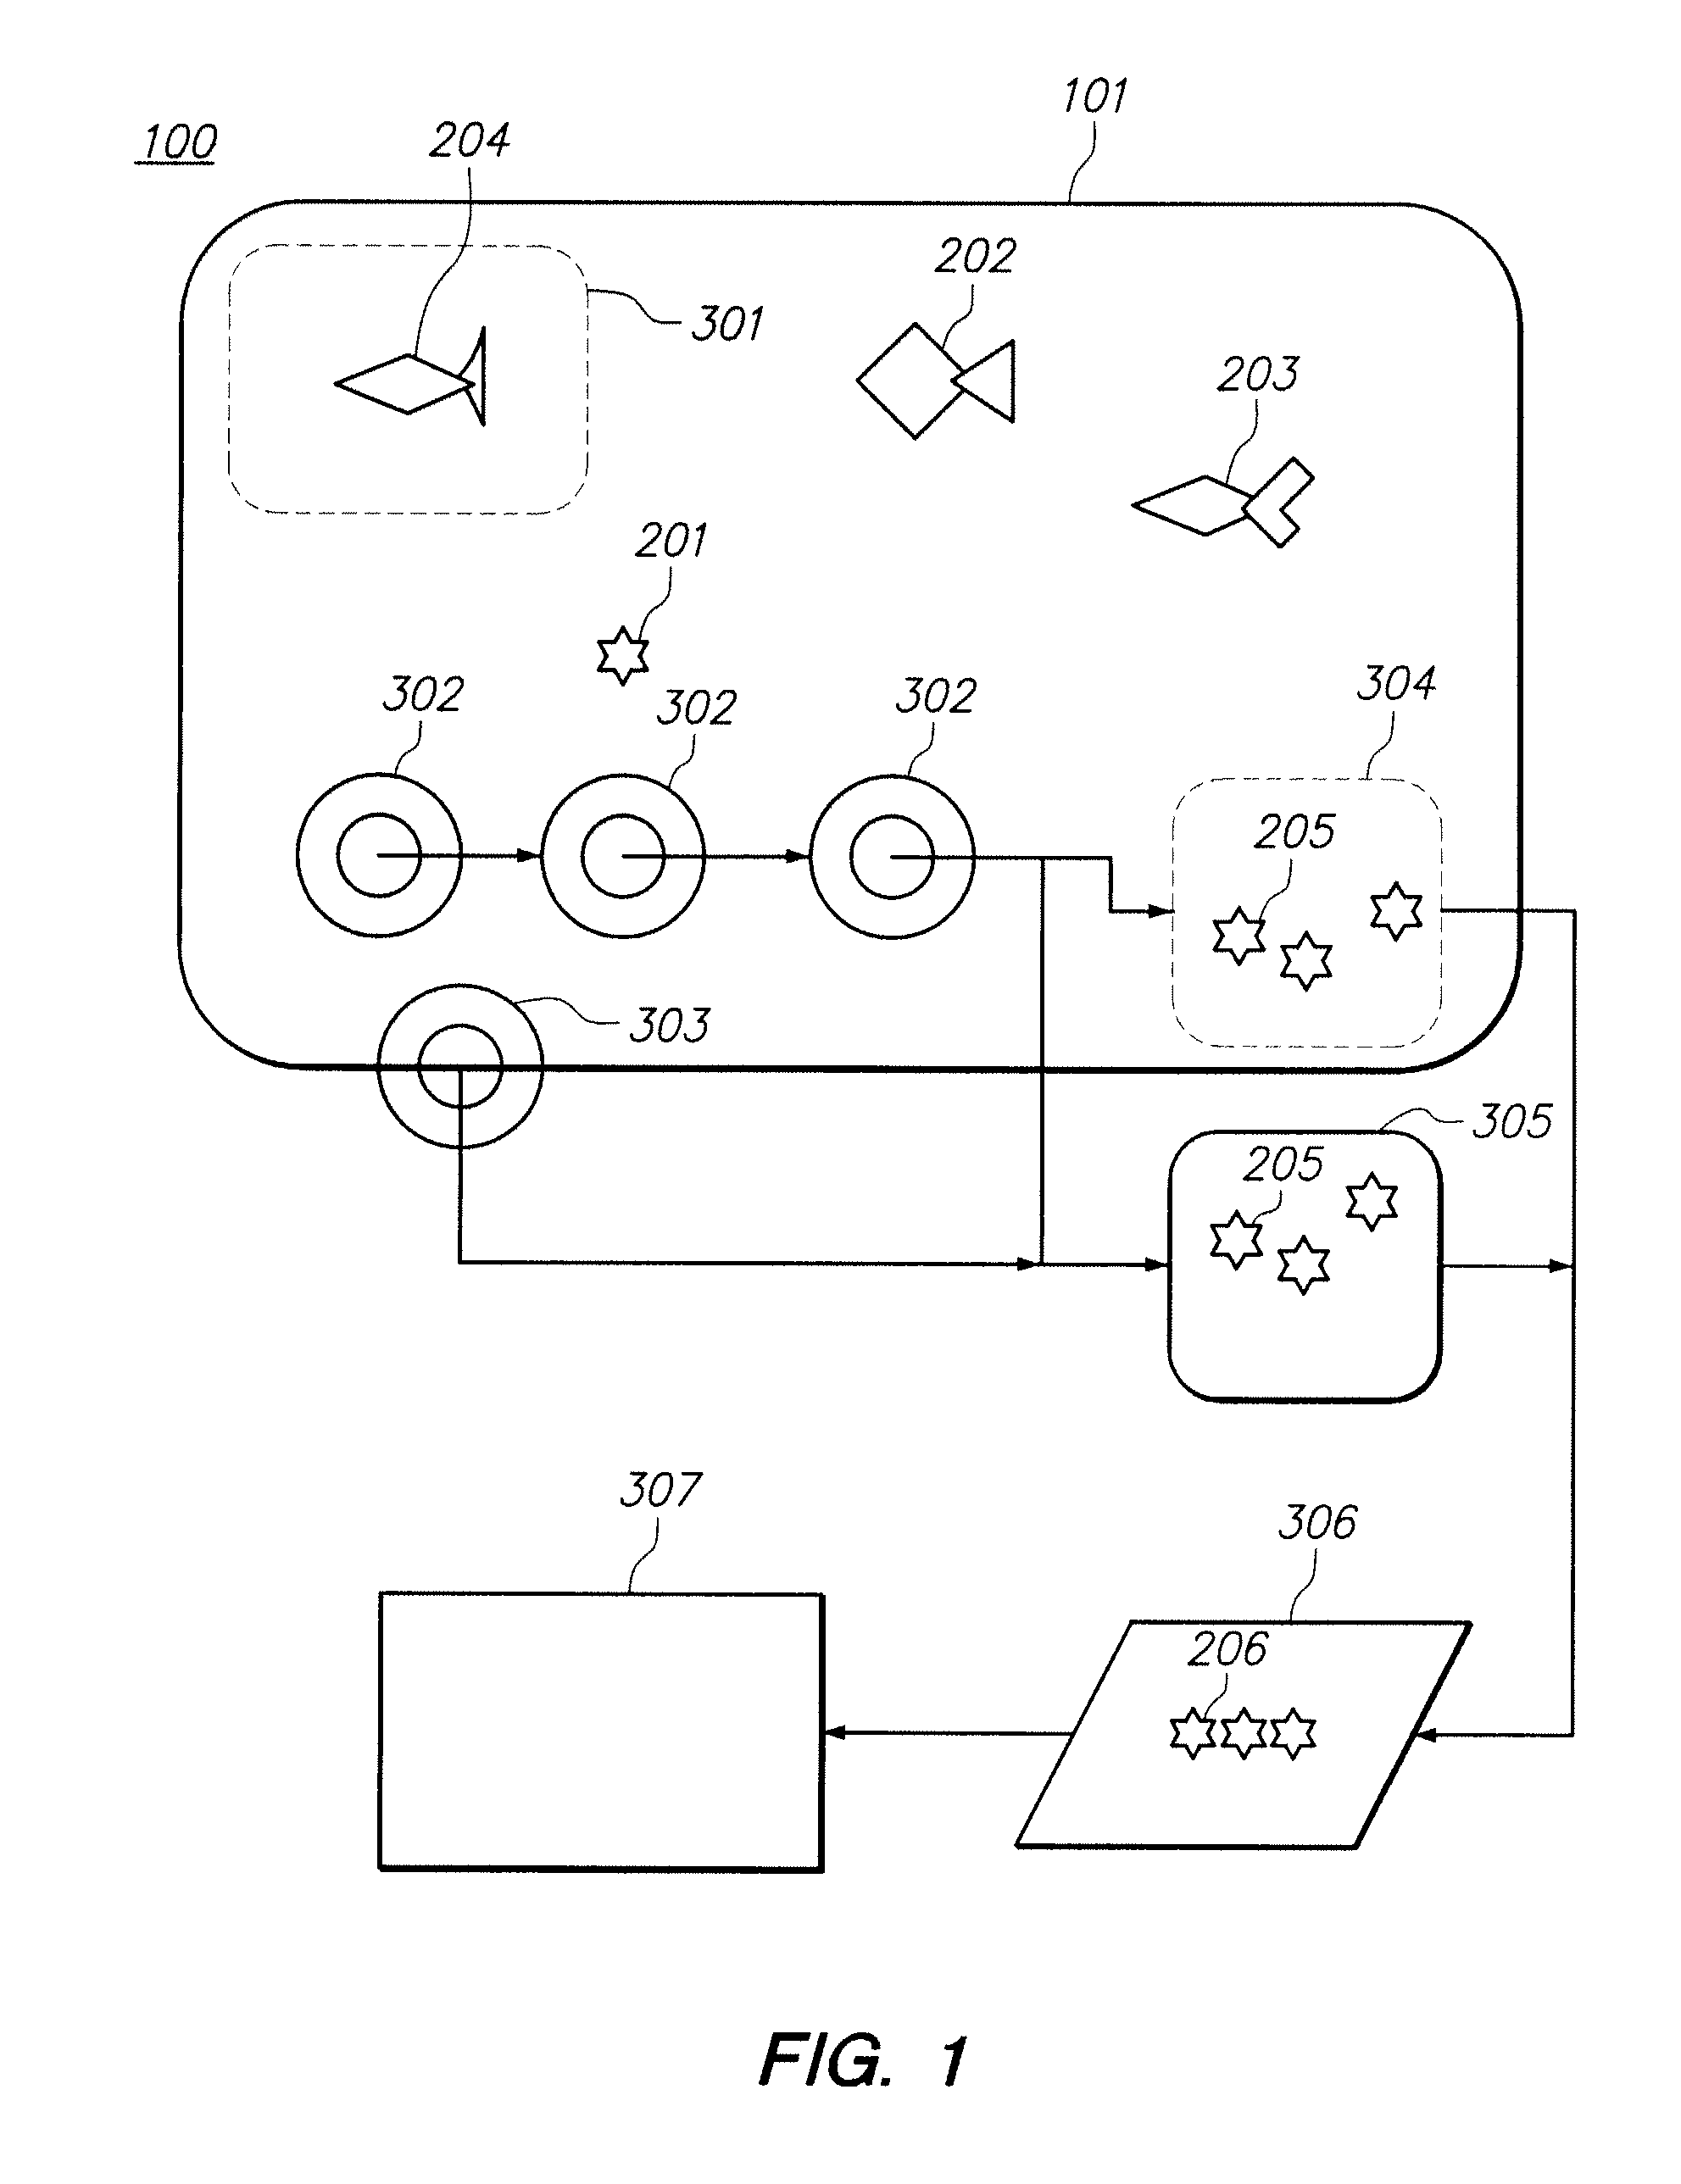 Systems and methods for producing biofuels from algae